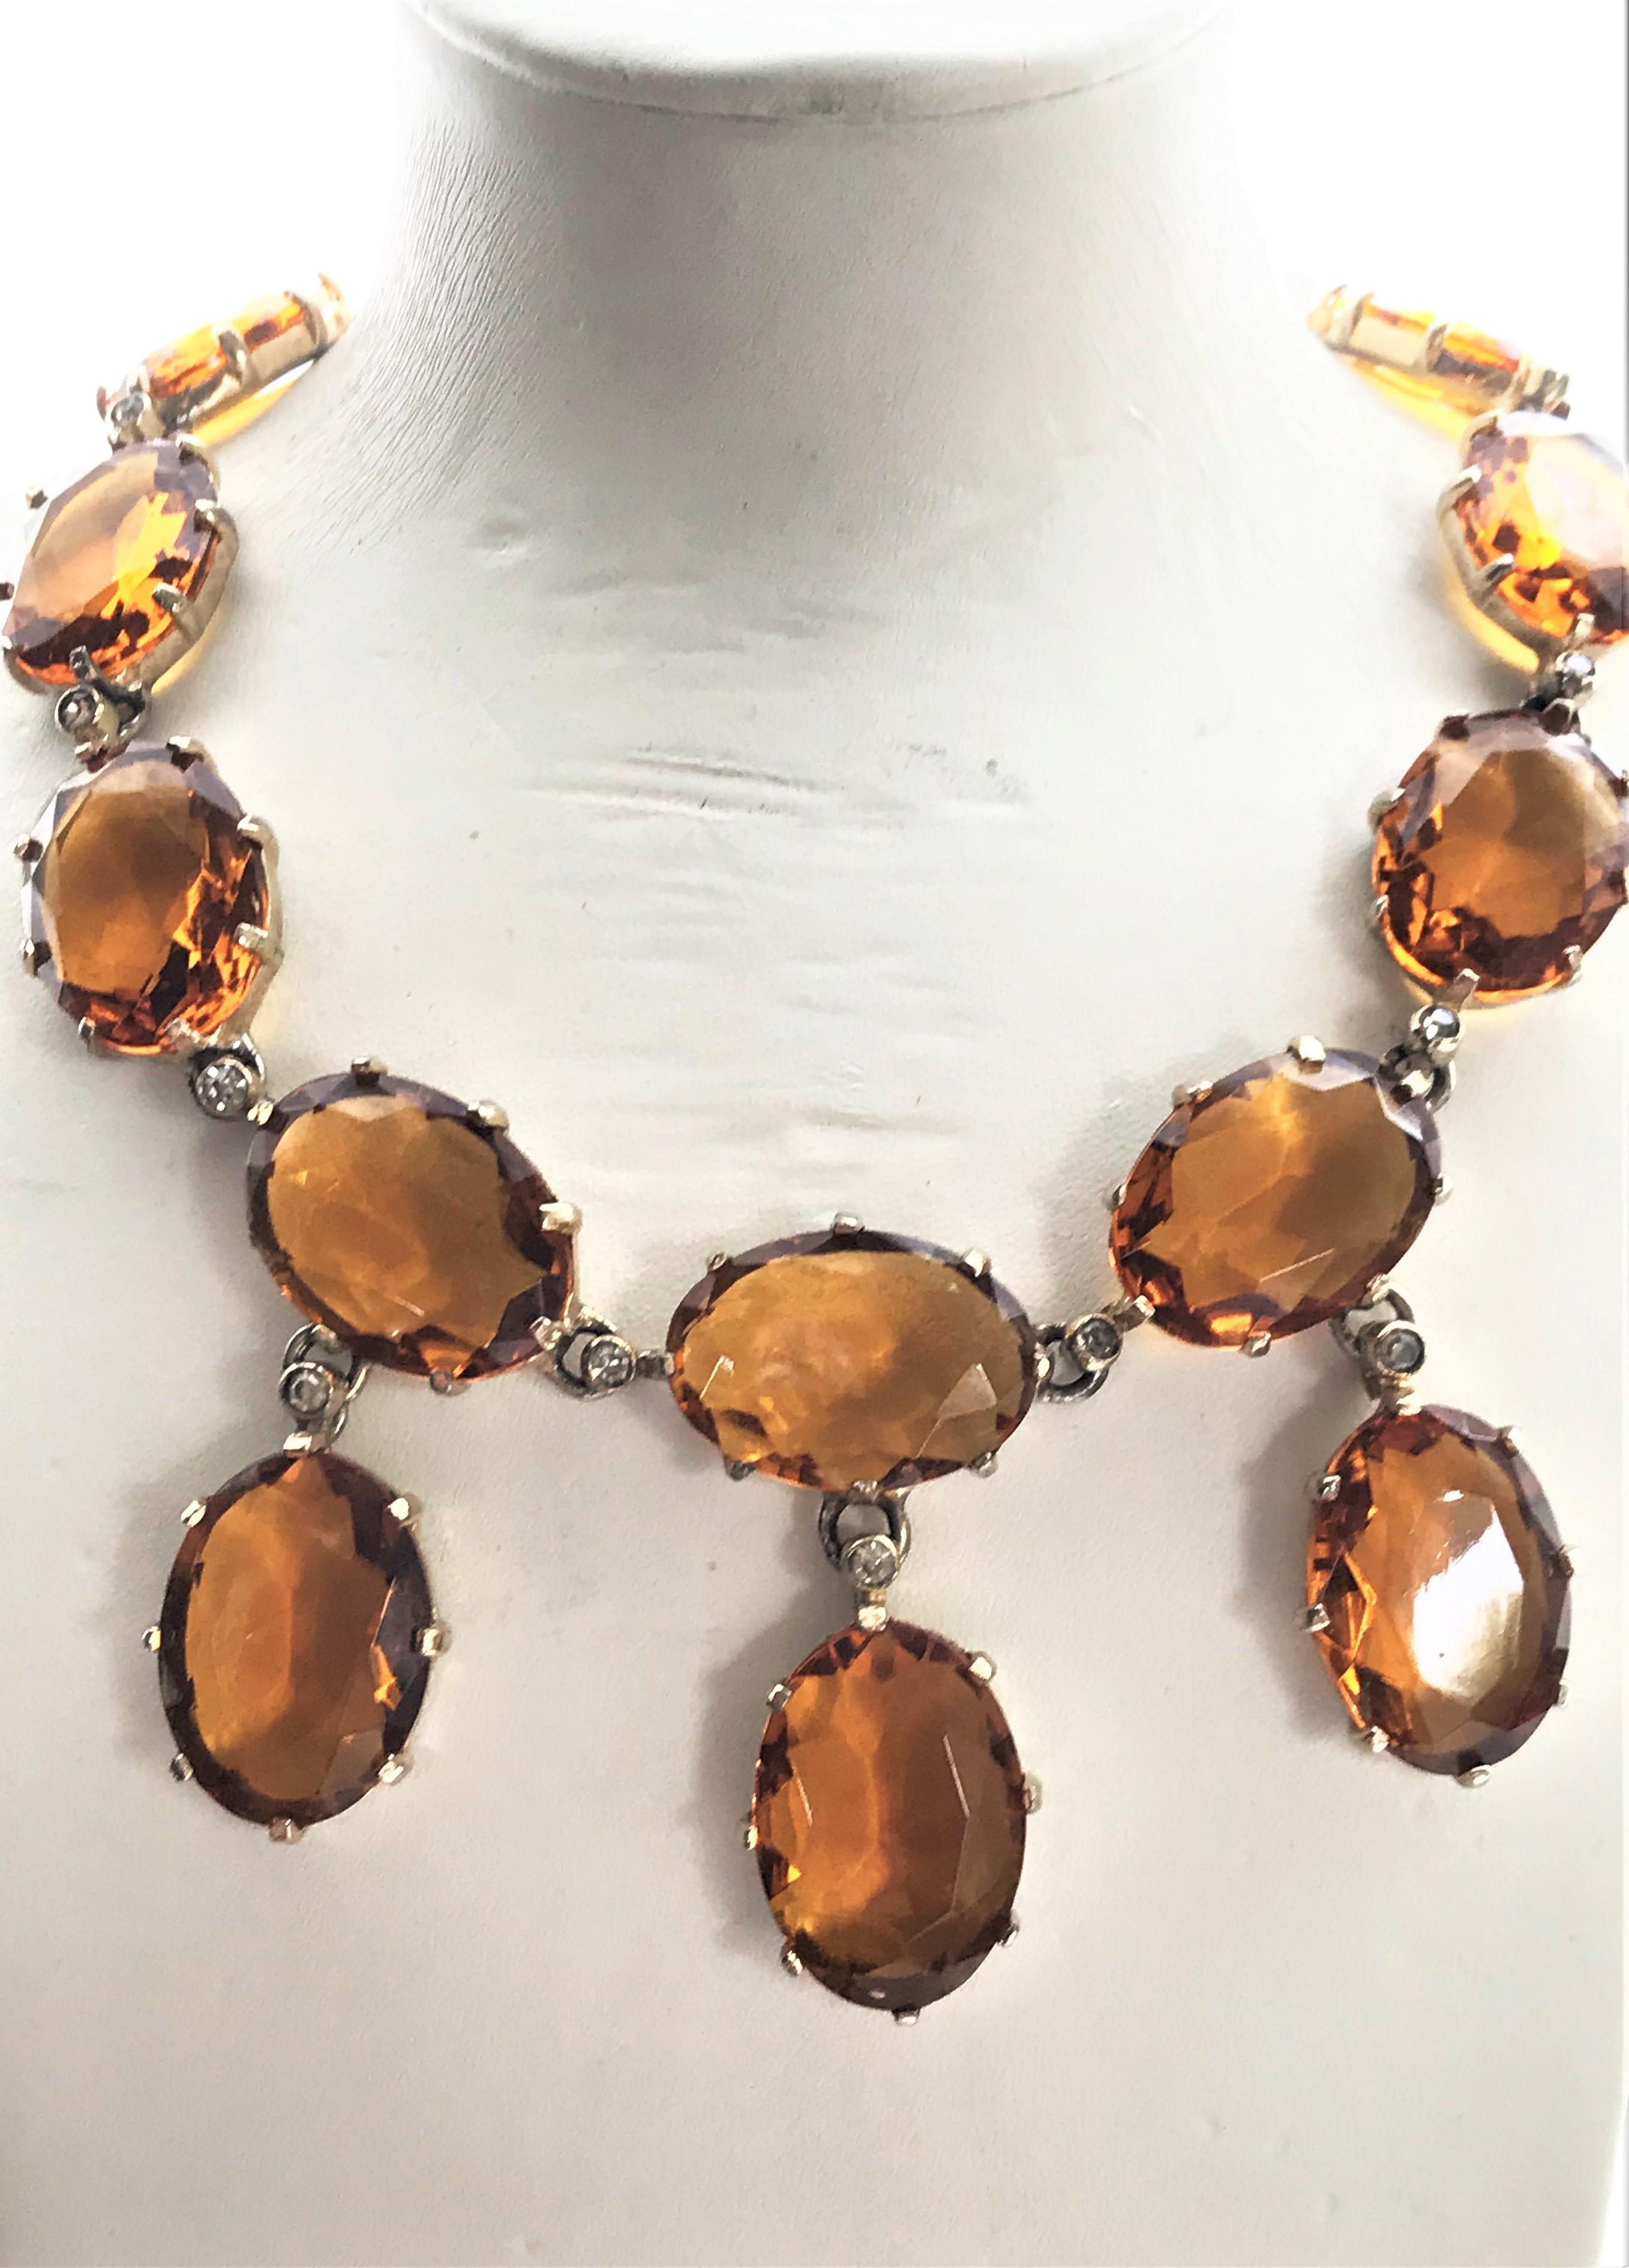 Modern Vintage necklace, amber colored rhinestones 1940s gold plated